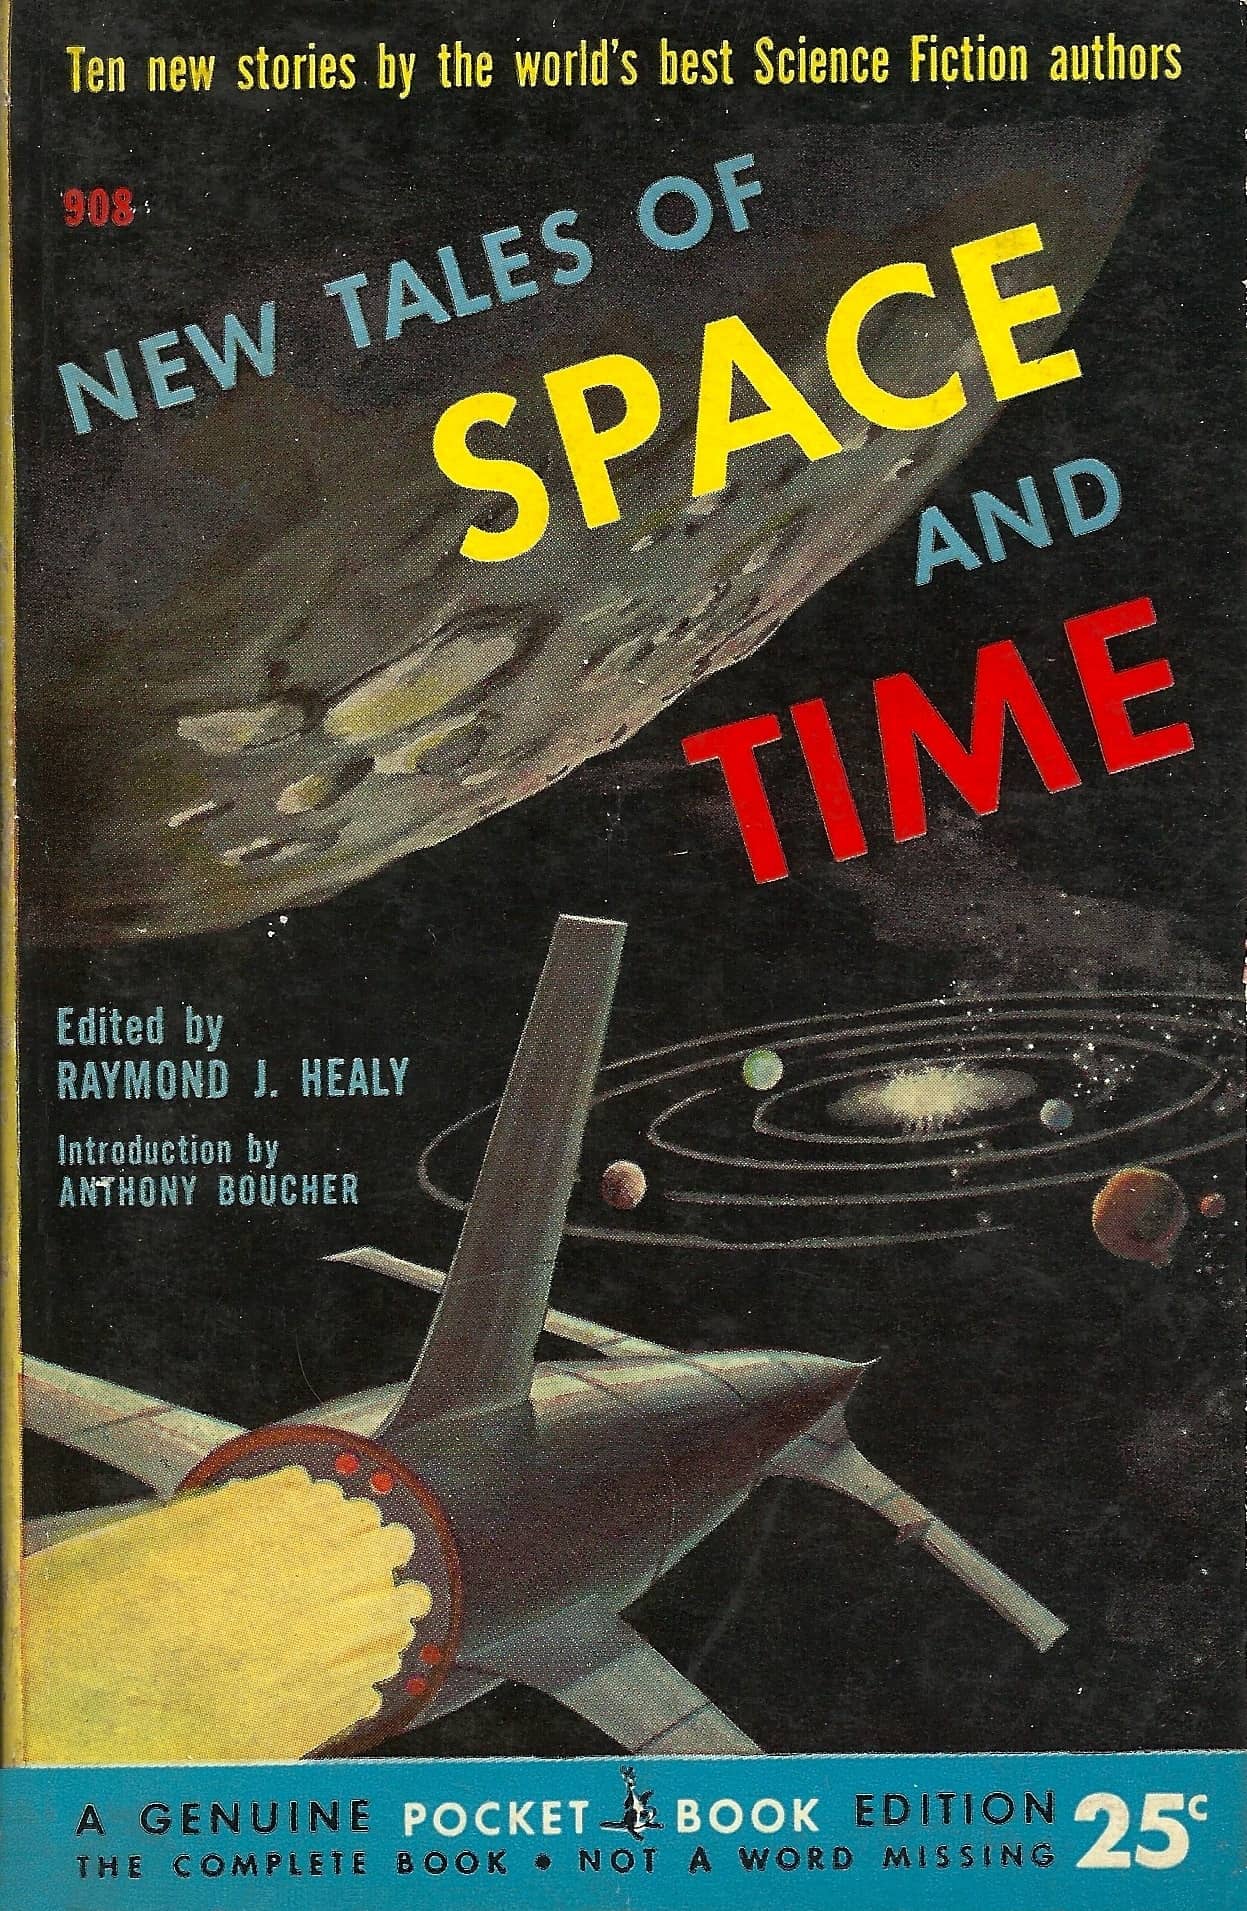 New Tales of Space and Time